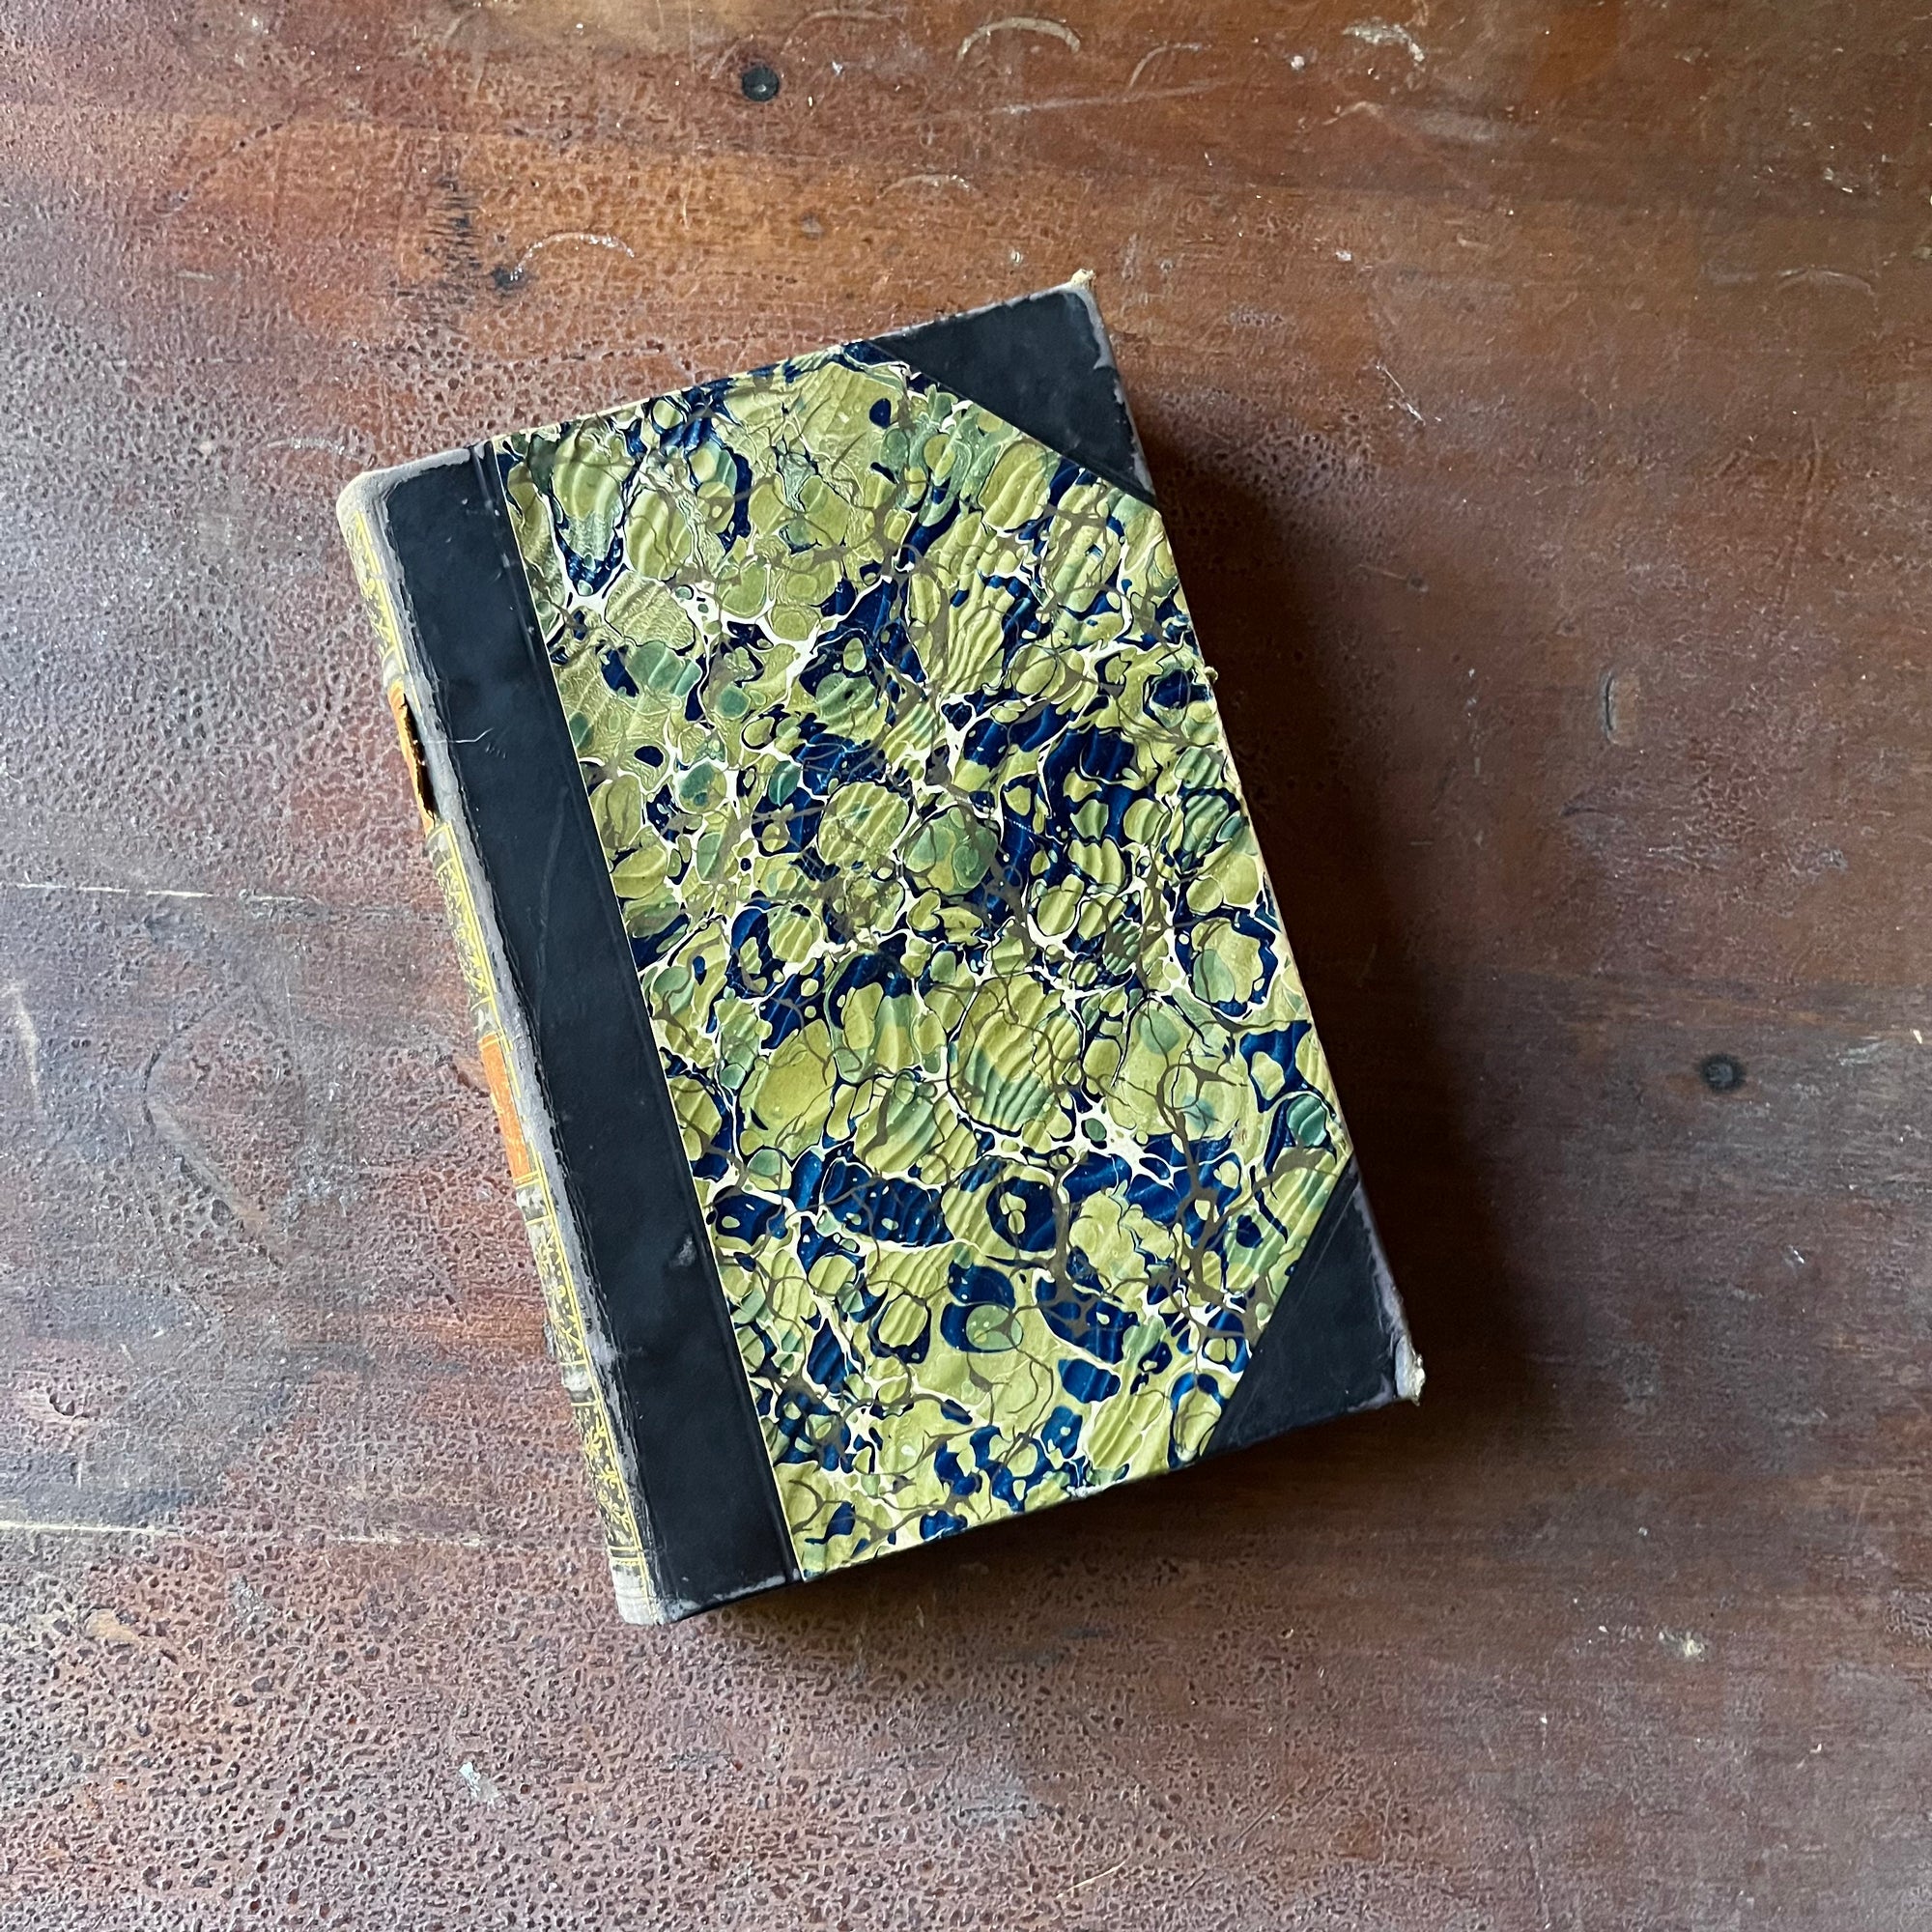 The Pioneers by James Fenimore Cooper - view of the Leatherbound, marbled front cover